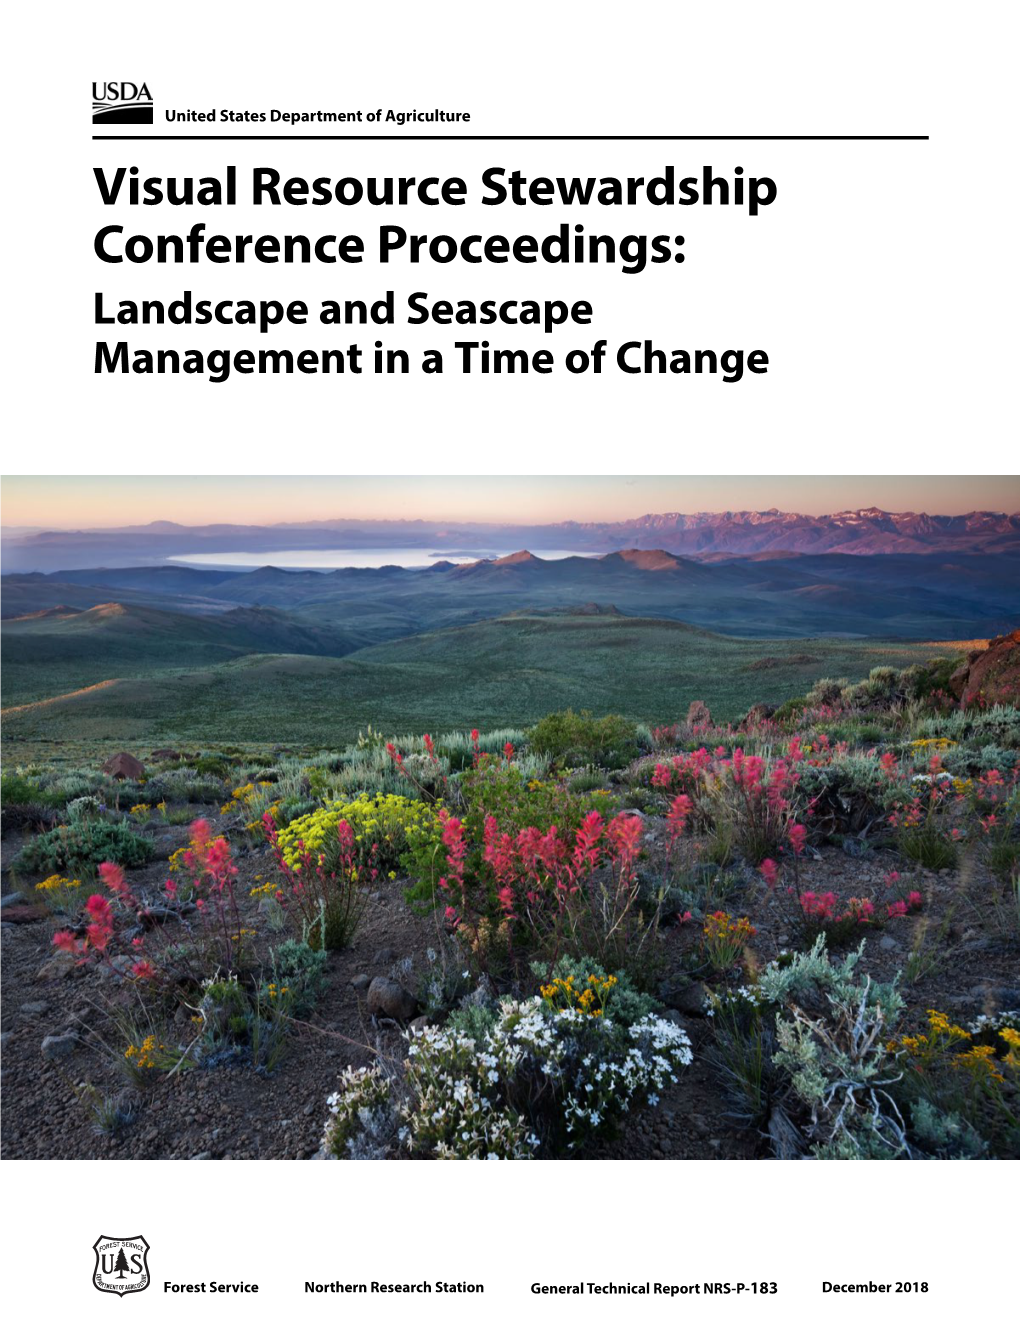 Visual Resource Stewardship Conference Proceedings: Landscape and Seascape Management in a Time of Change